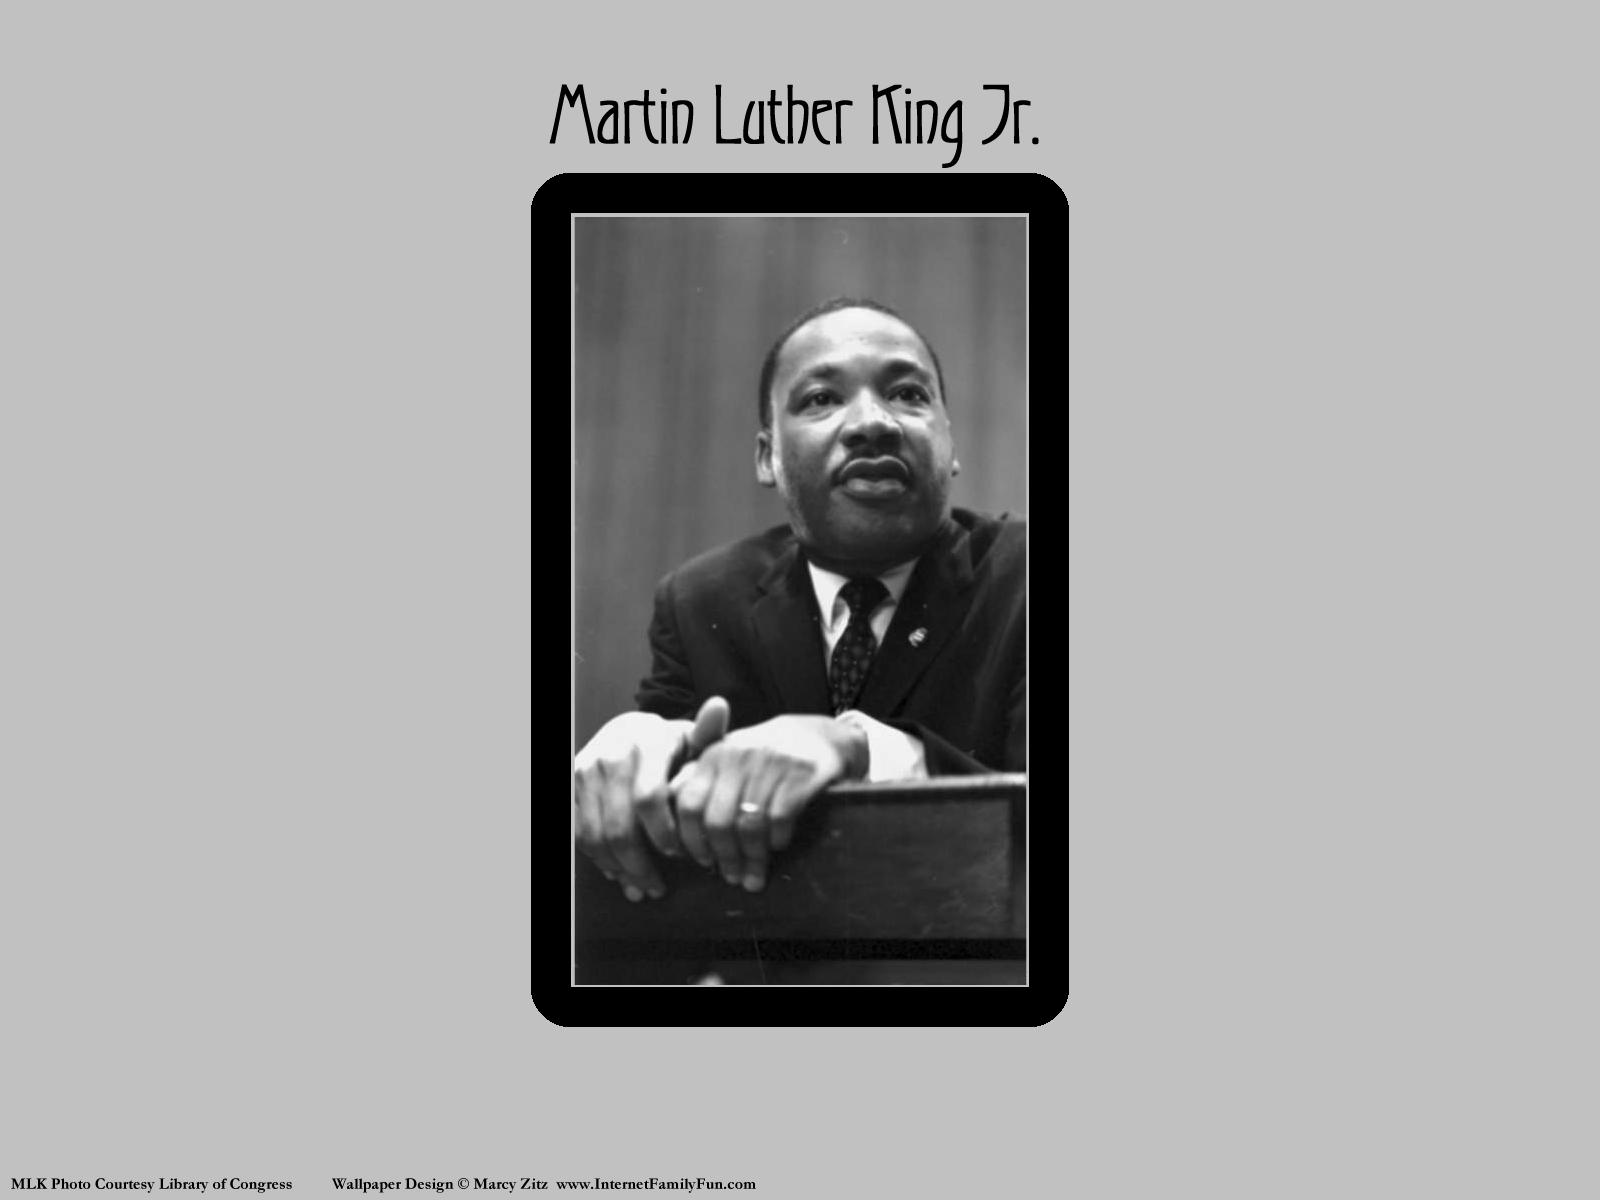 Martin Luther King Jr Day displayed at 500x375